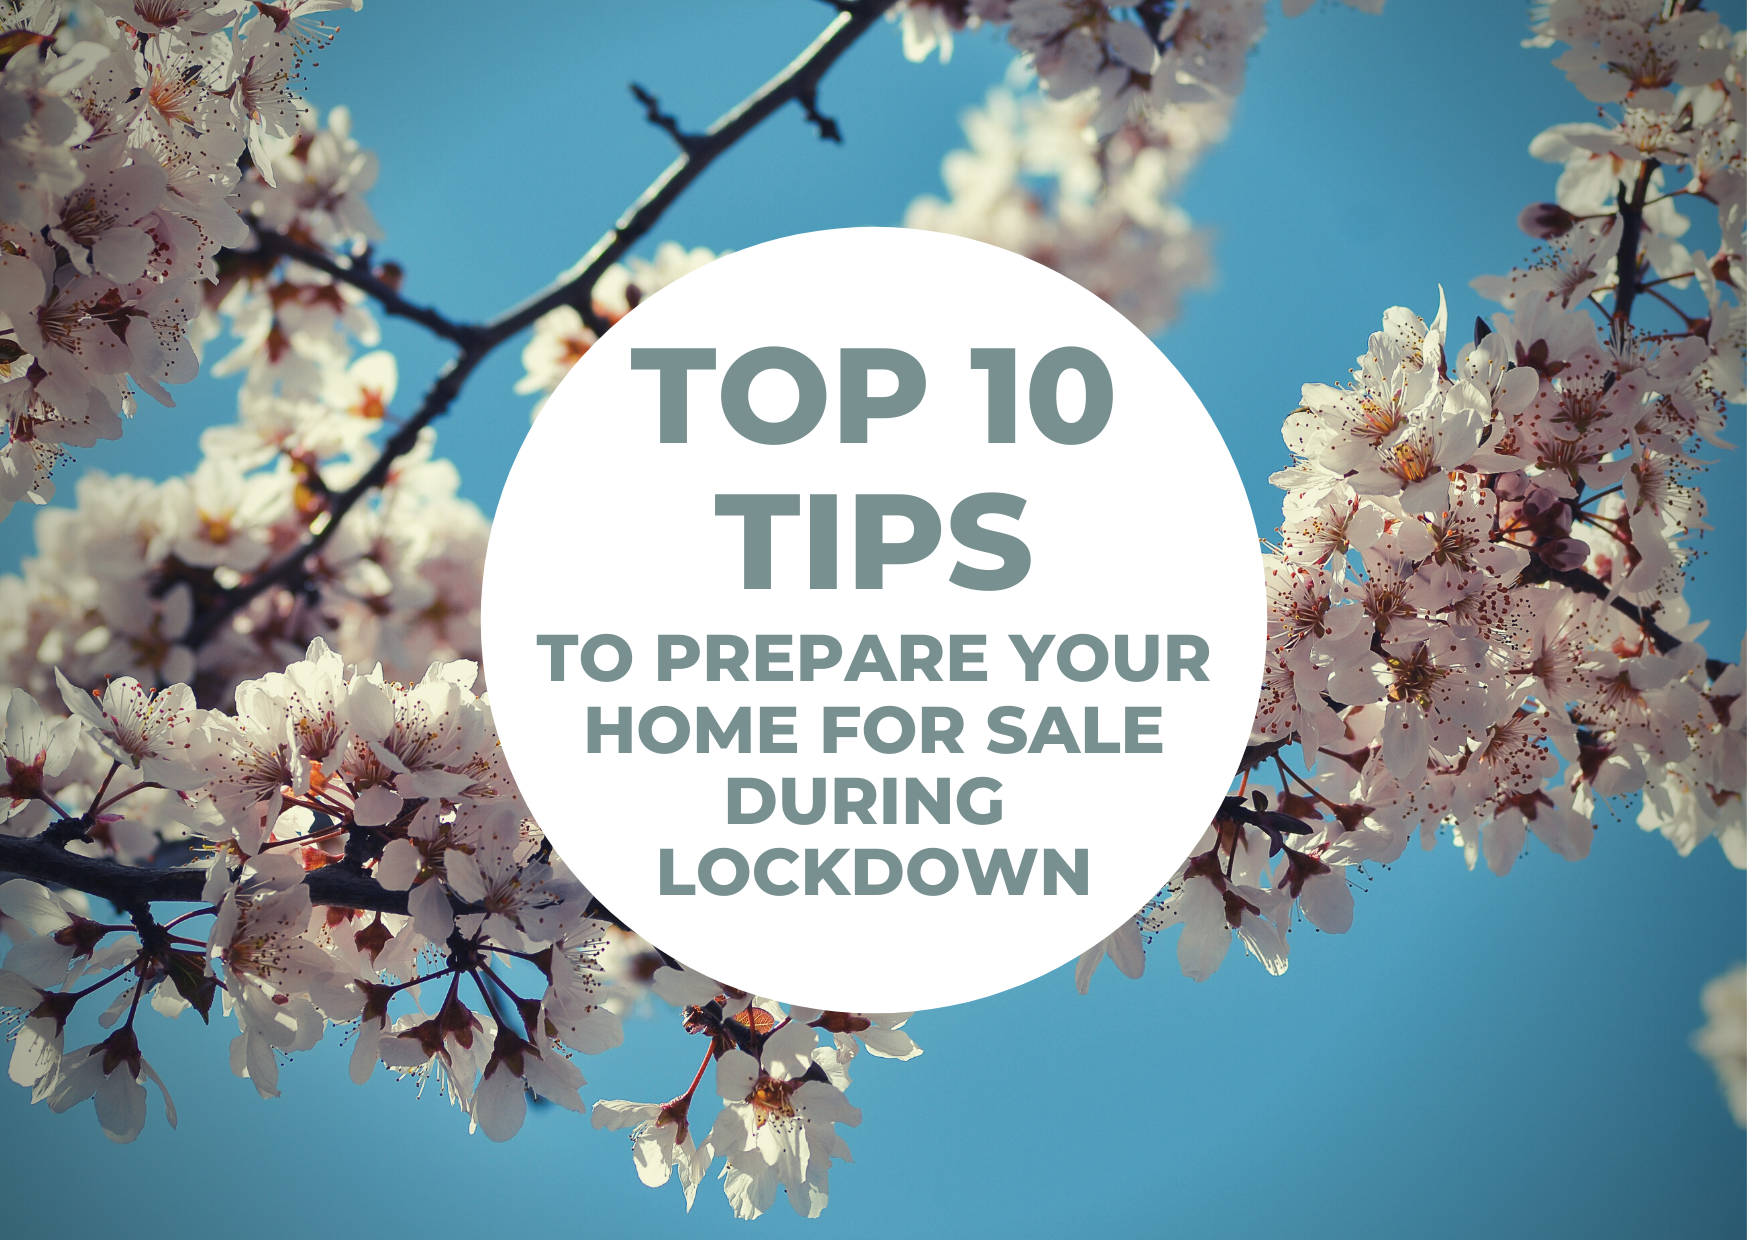 Top 10 Tips to Prepare Your Home for Sale During Lockdown